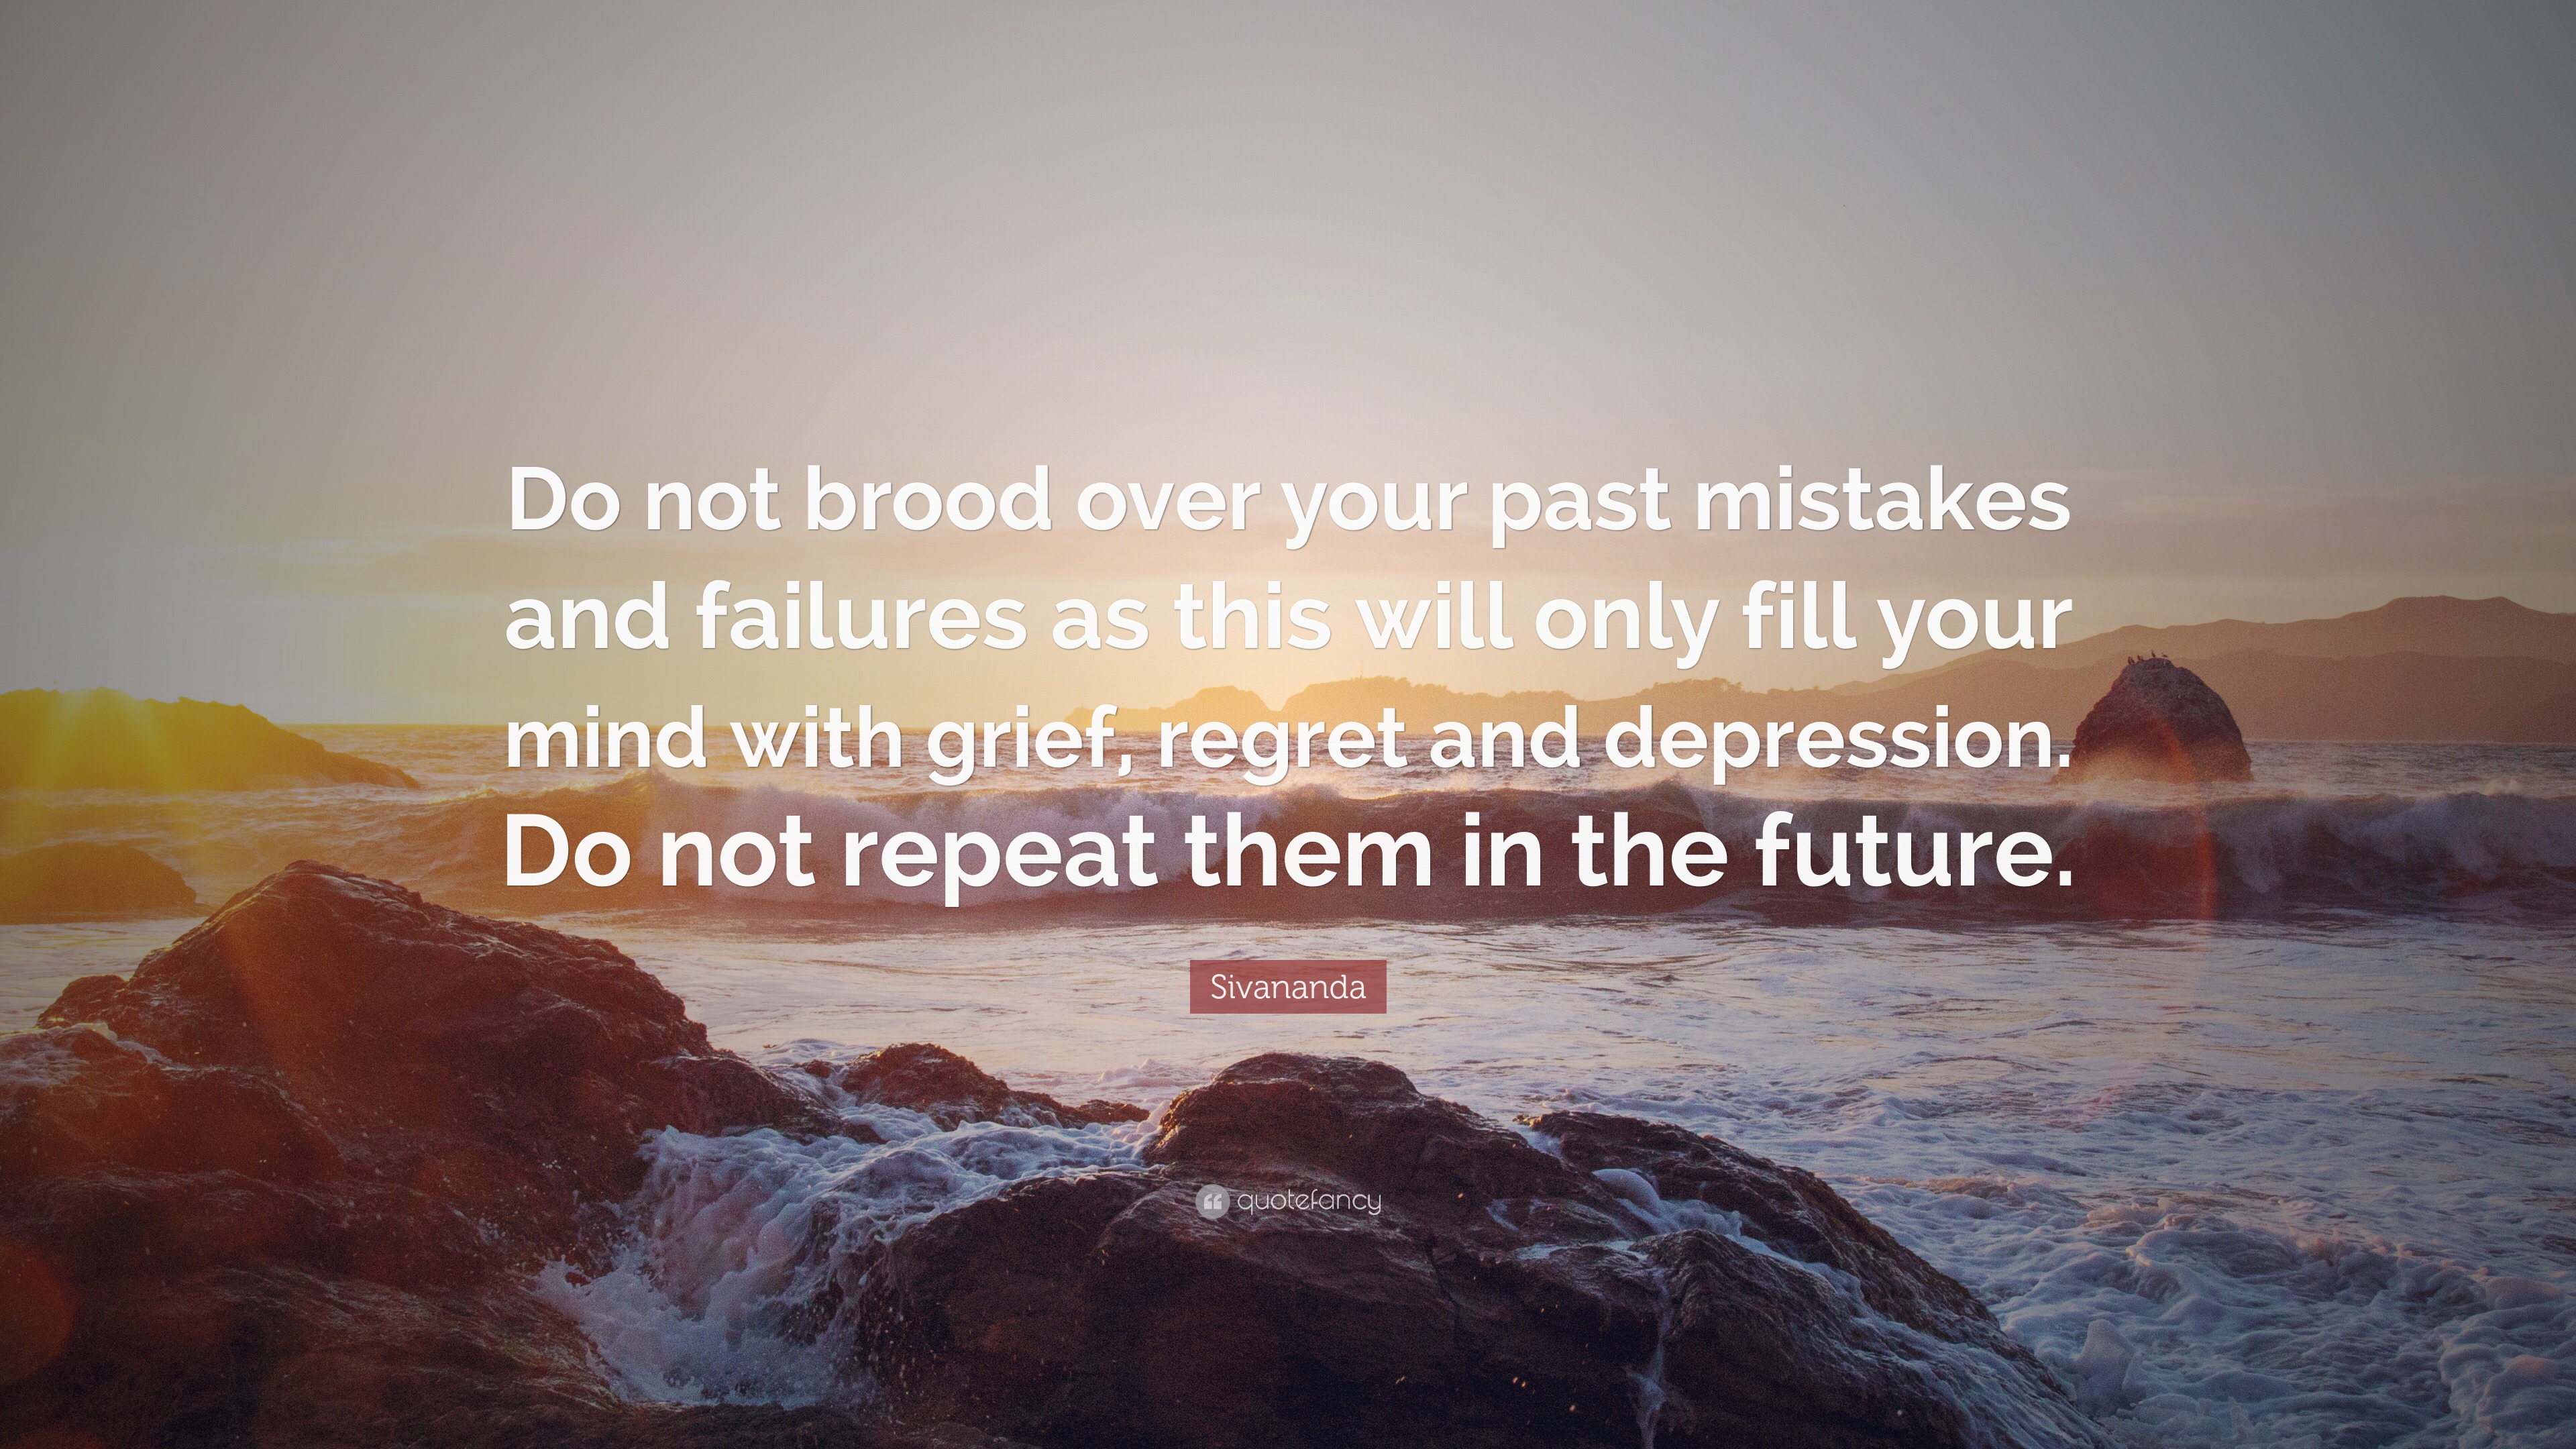 How to stop reliving past regrets/mistakes from your mind, even